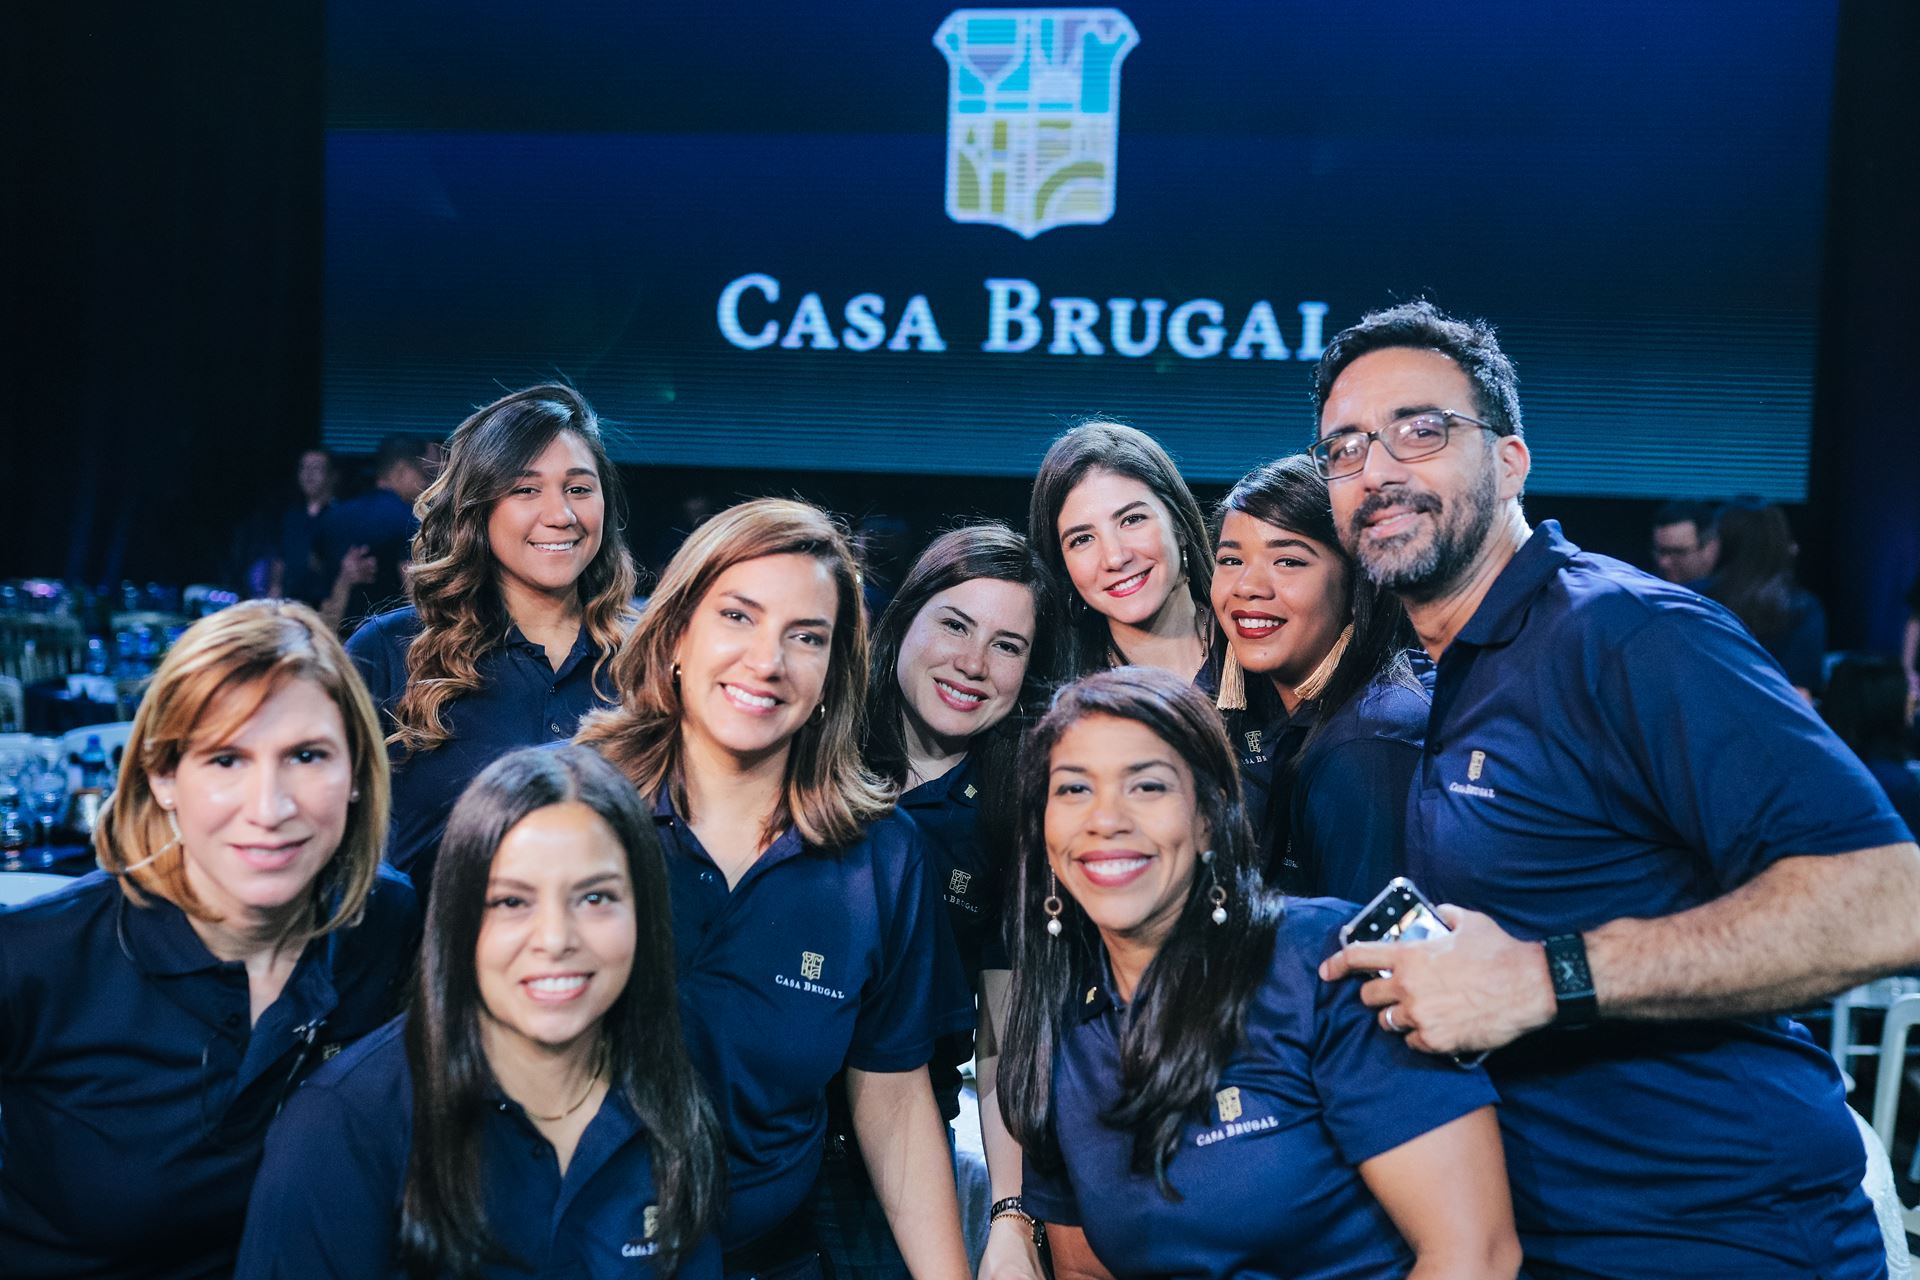 Brugal celebrated its 130th anniversary in 2018